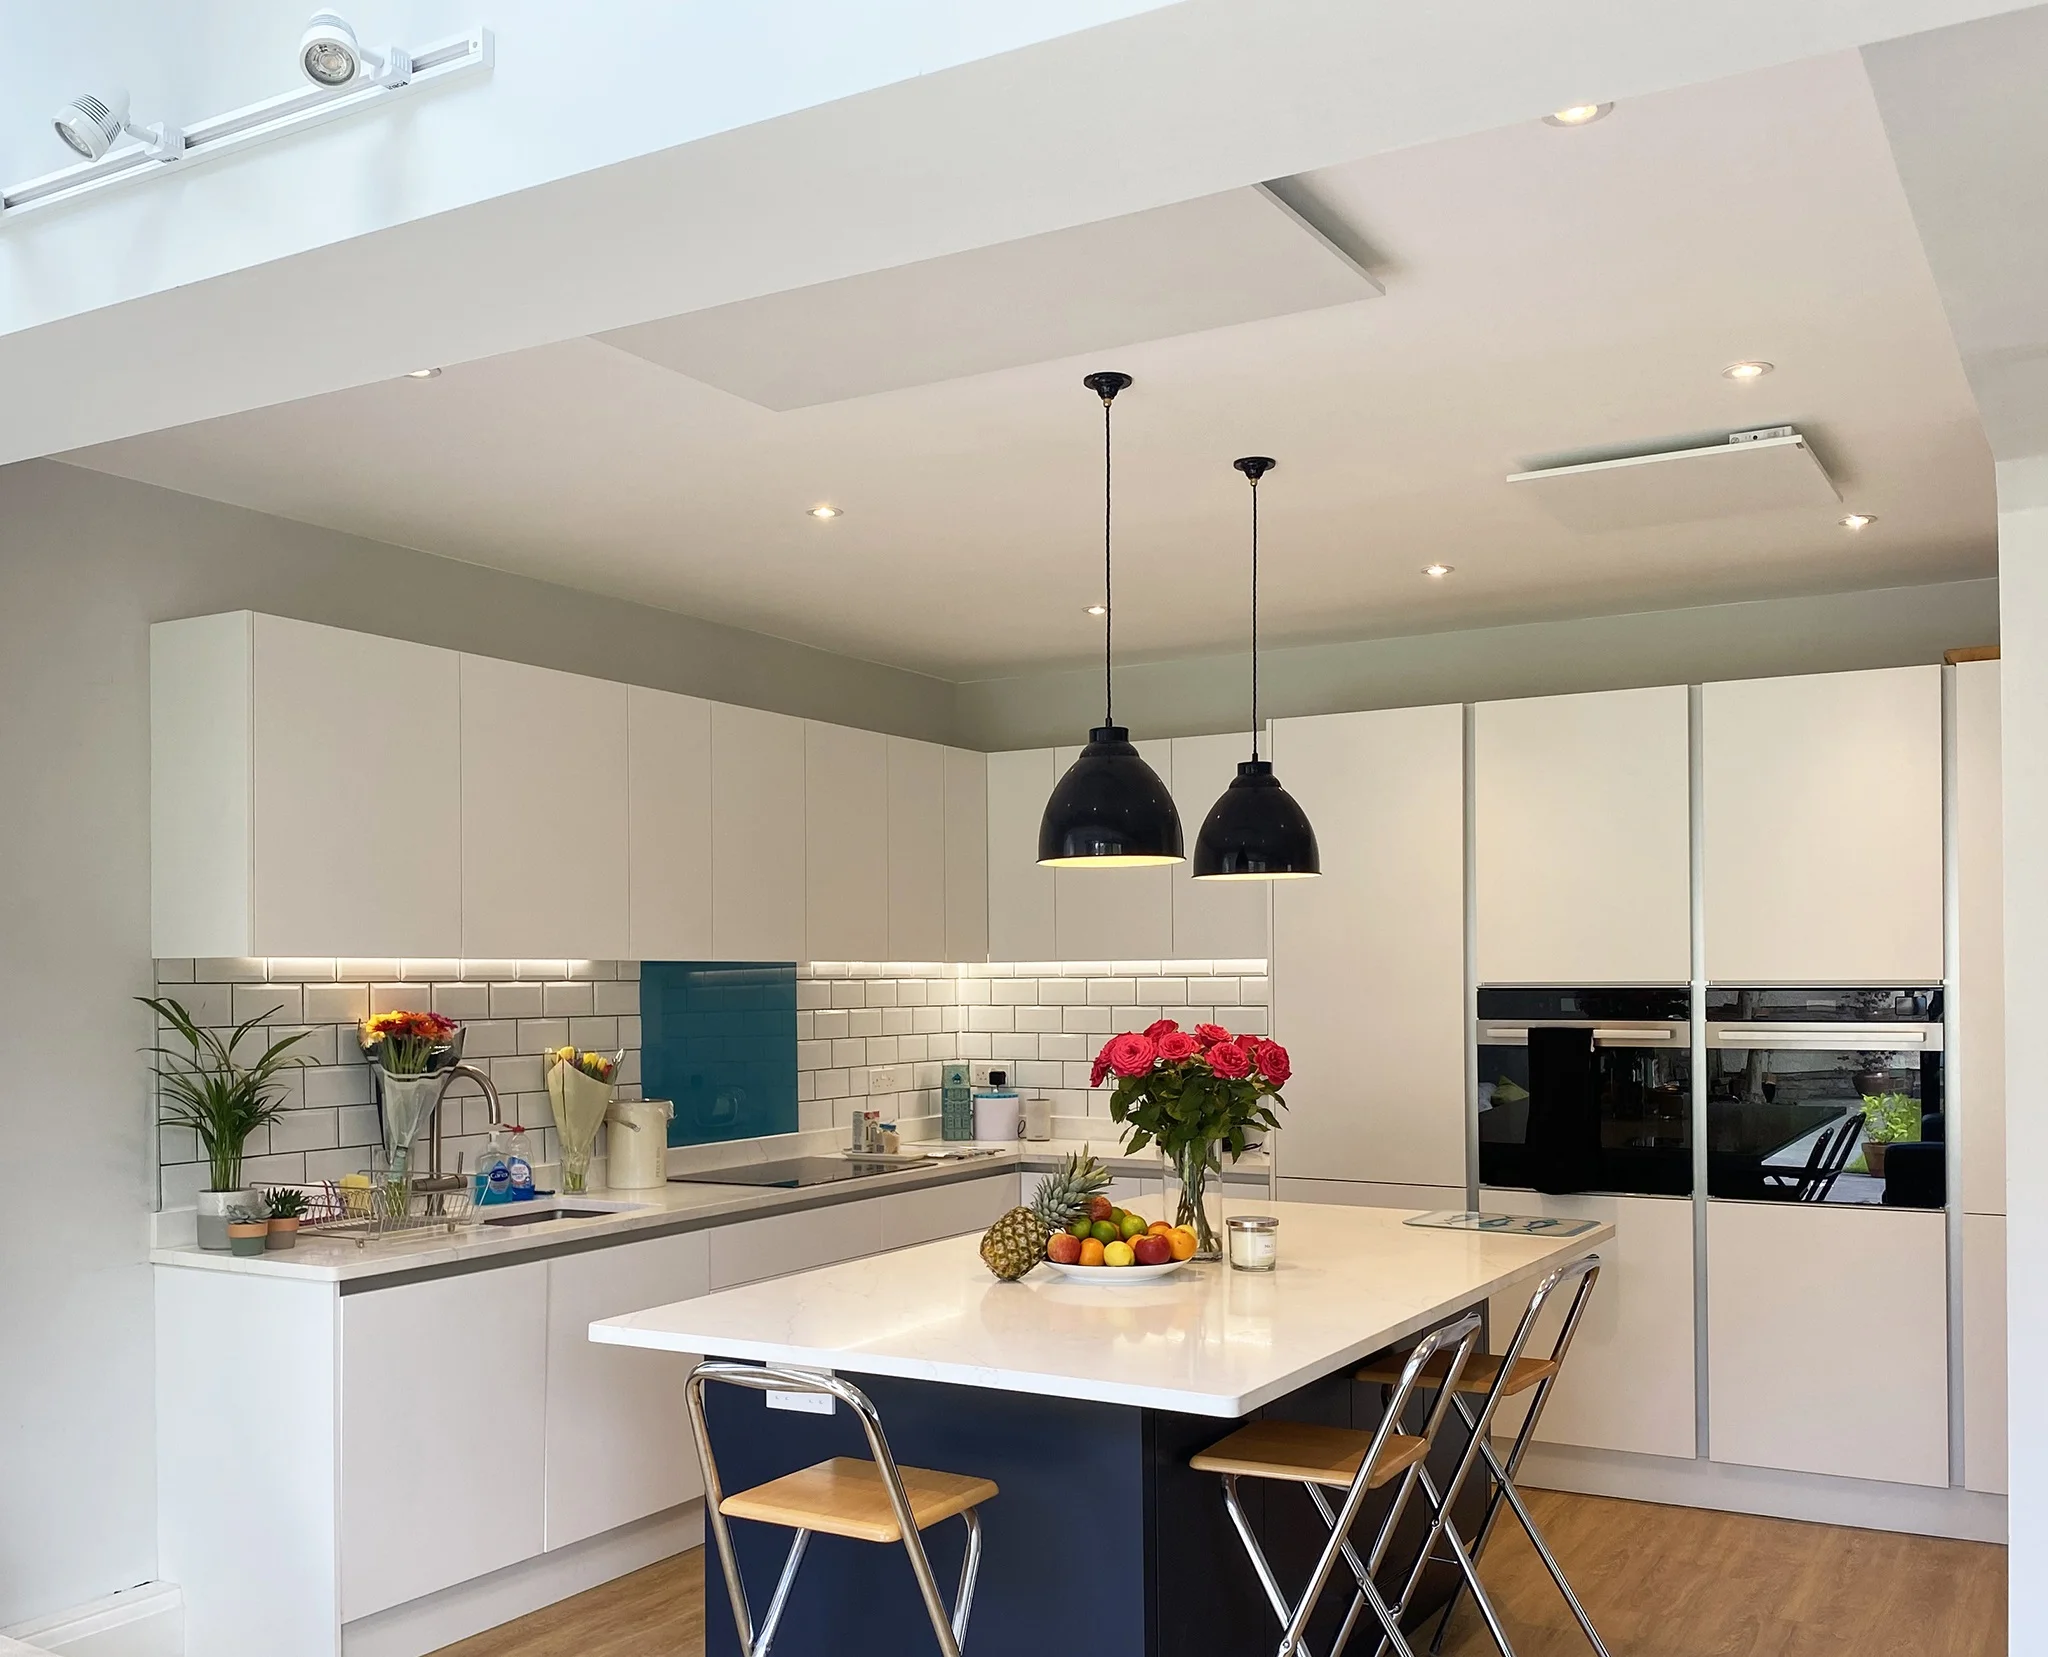 A kitchen fitted with two thin infrared ceiling panels